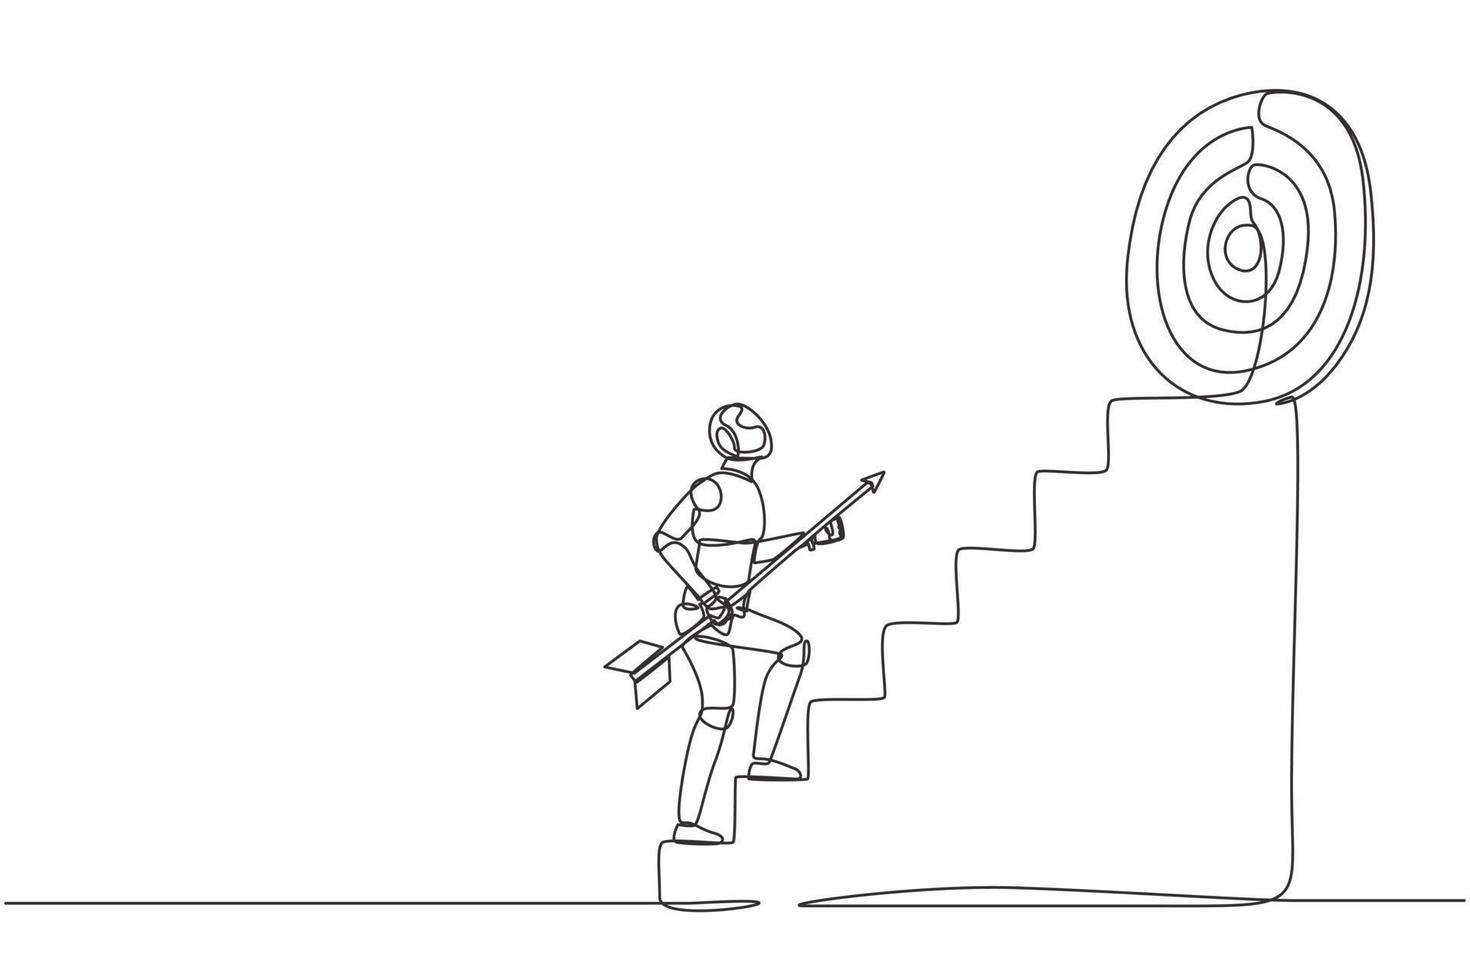 Single continuous line drawing robot holding arrow running up stairway to high target. Robotic artificial intelligence. Electronic technology industry. One line draw graphic design vector illustration